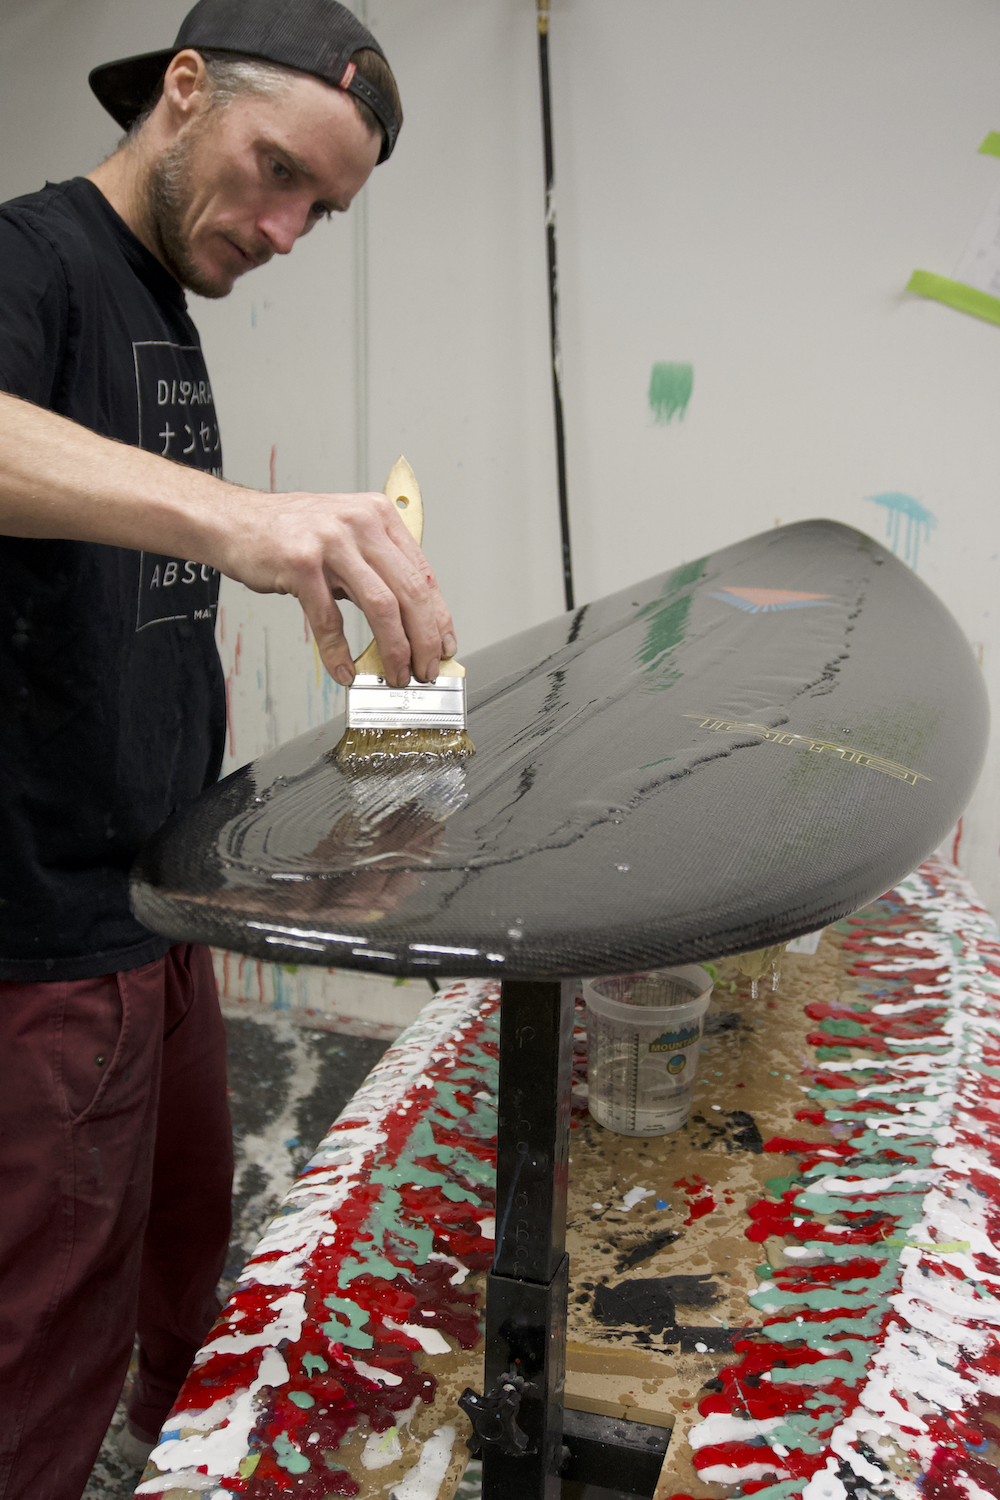 A Dark Arts surfboards employee putting epoxy coating on a carbon fiber surfboard